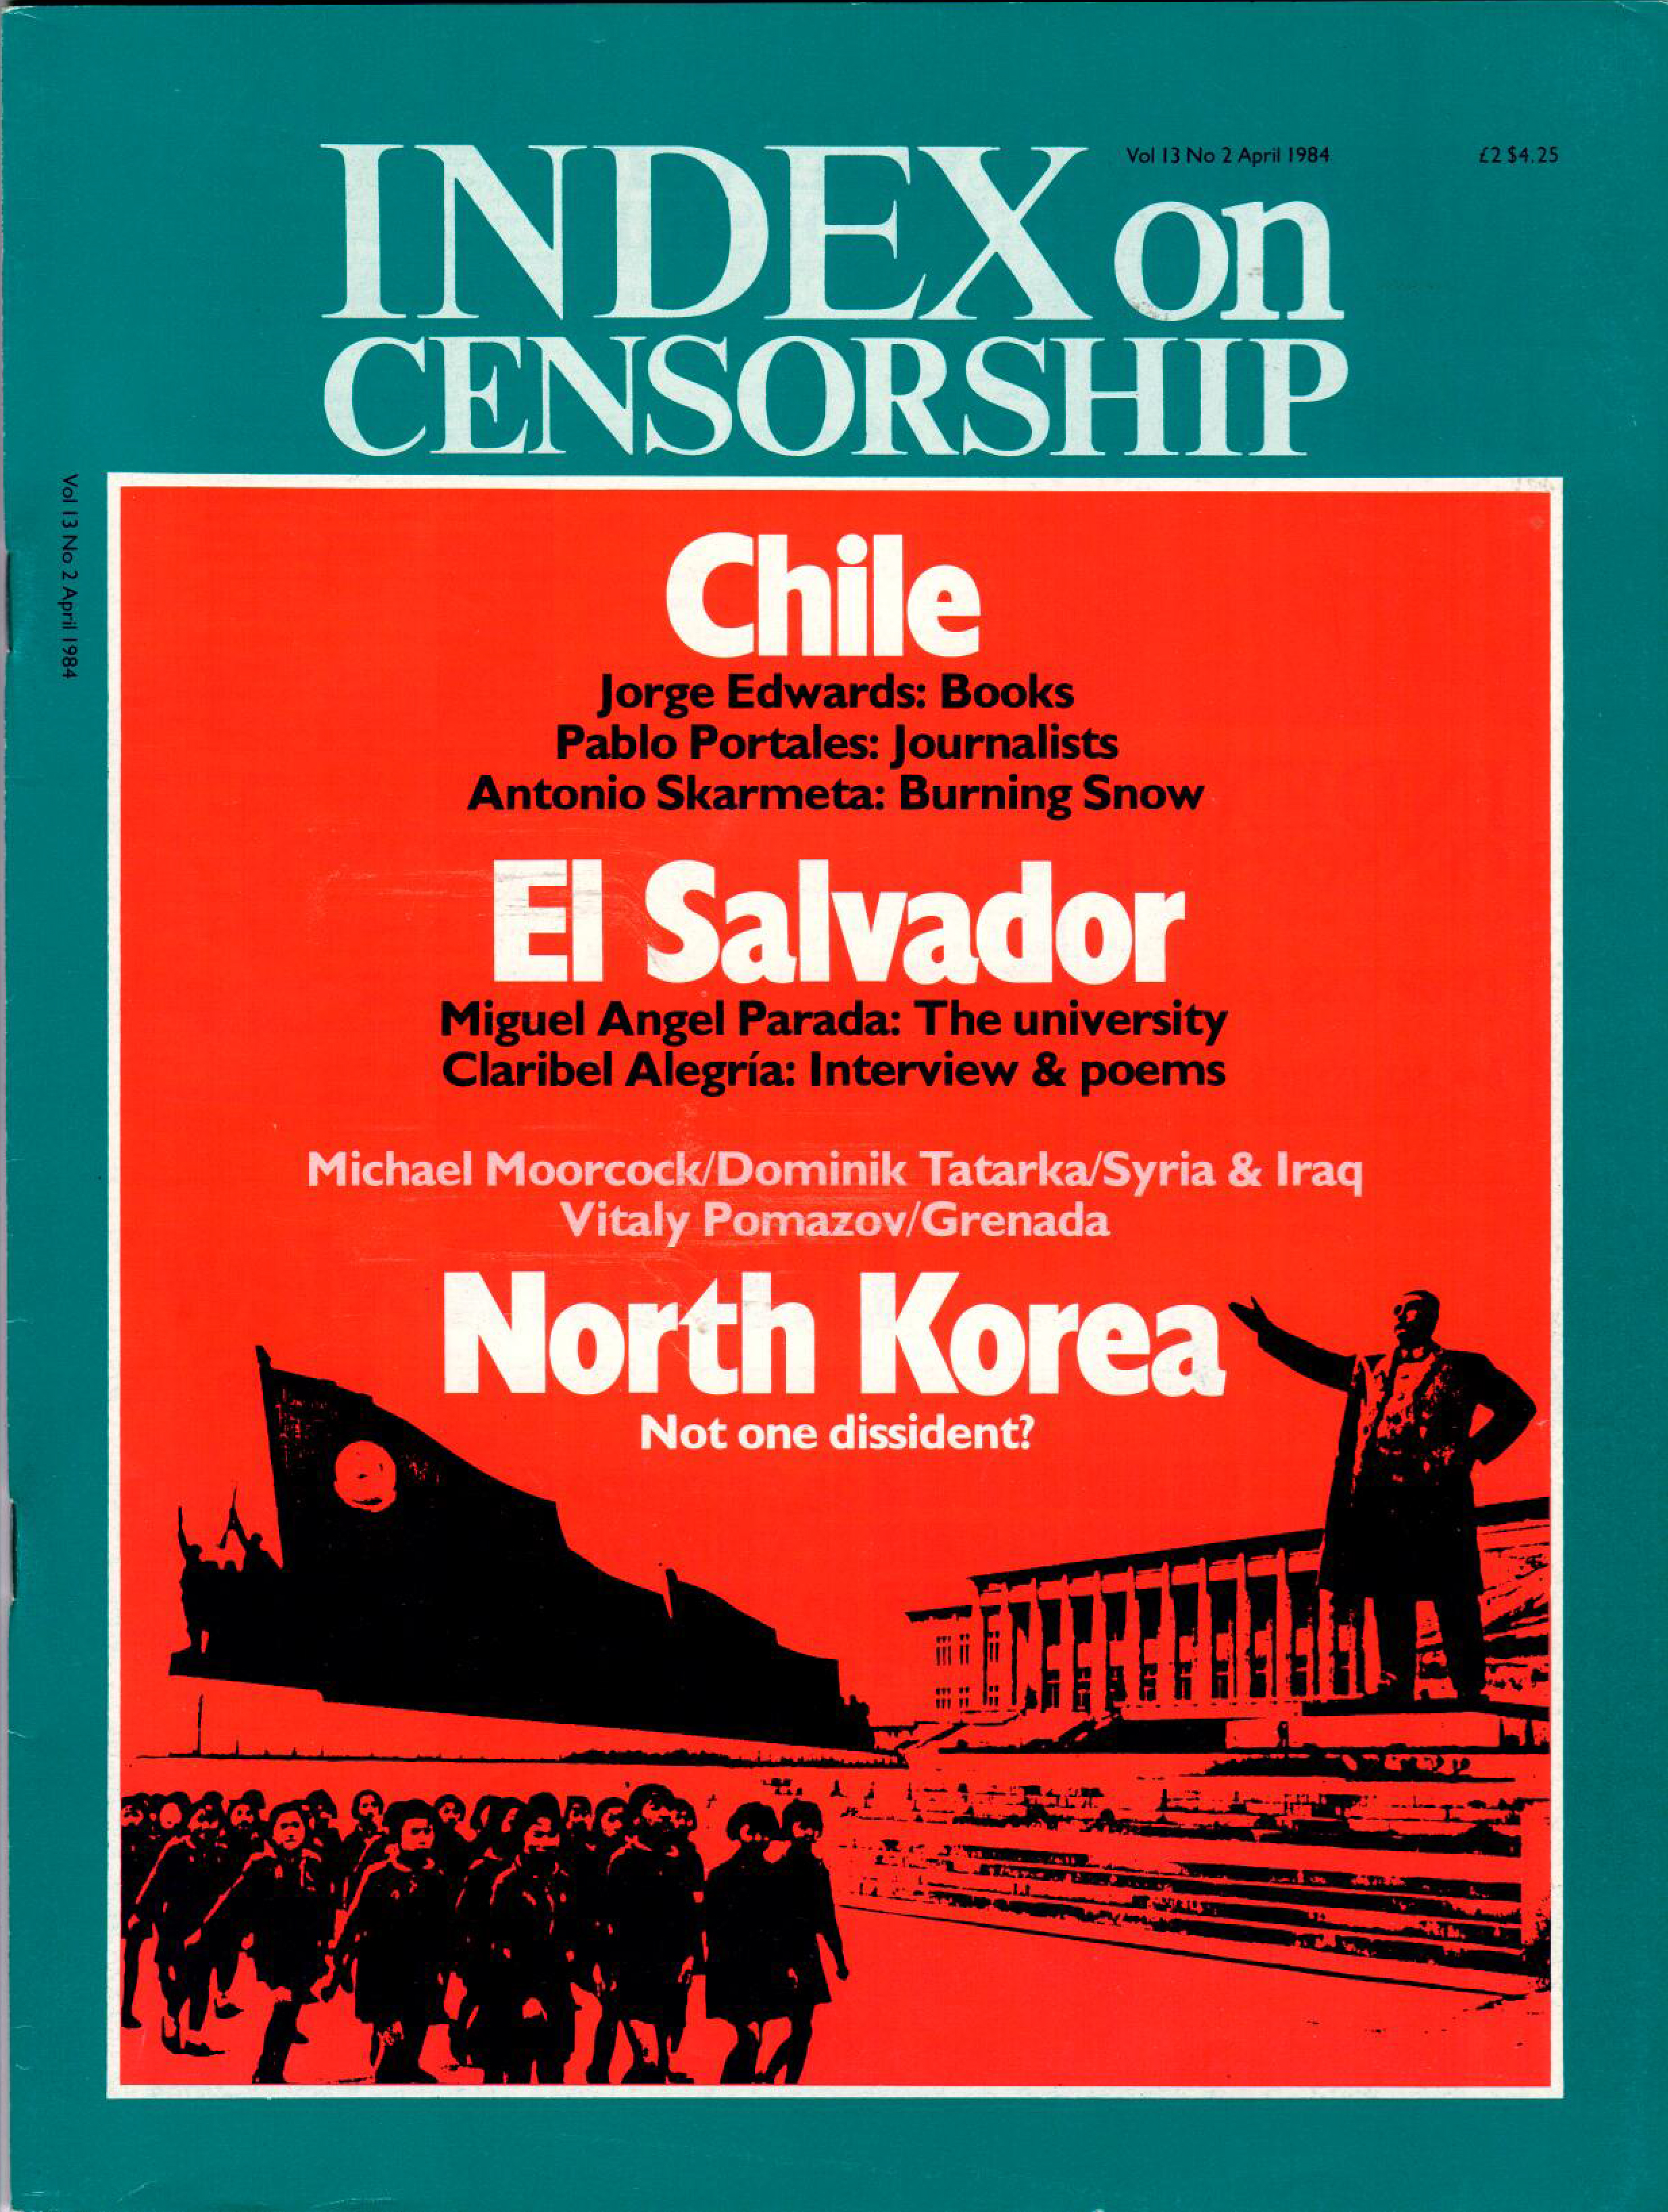 North Korea: Not one dissent?, the April 1984 issue of Index on Censorship magazine.